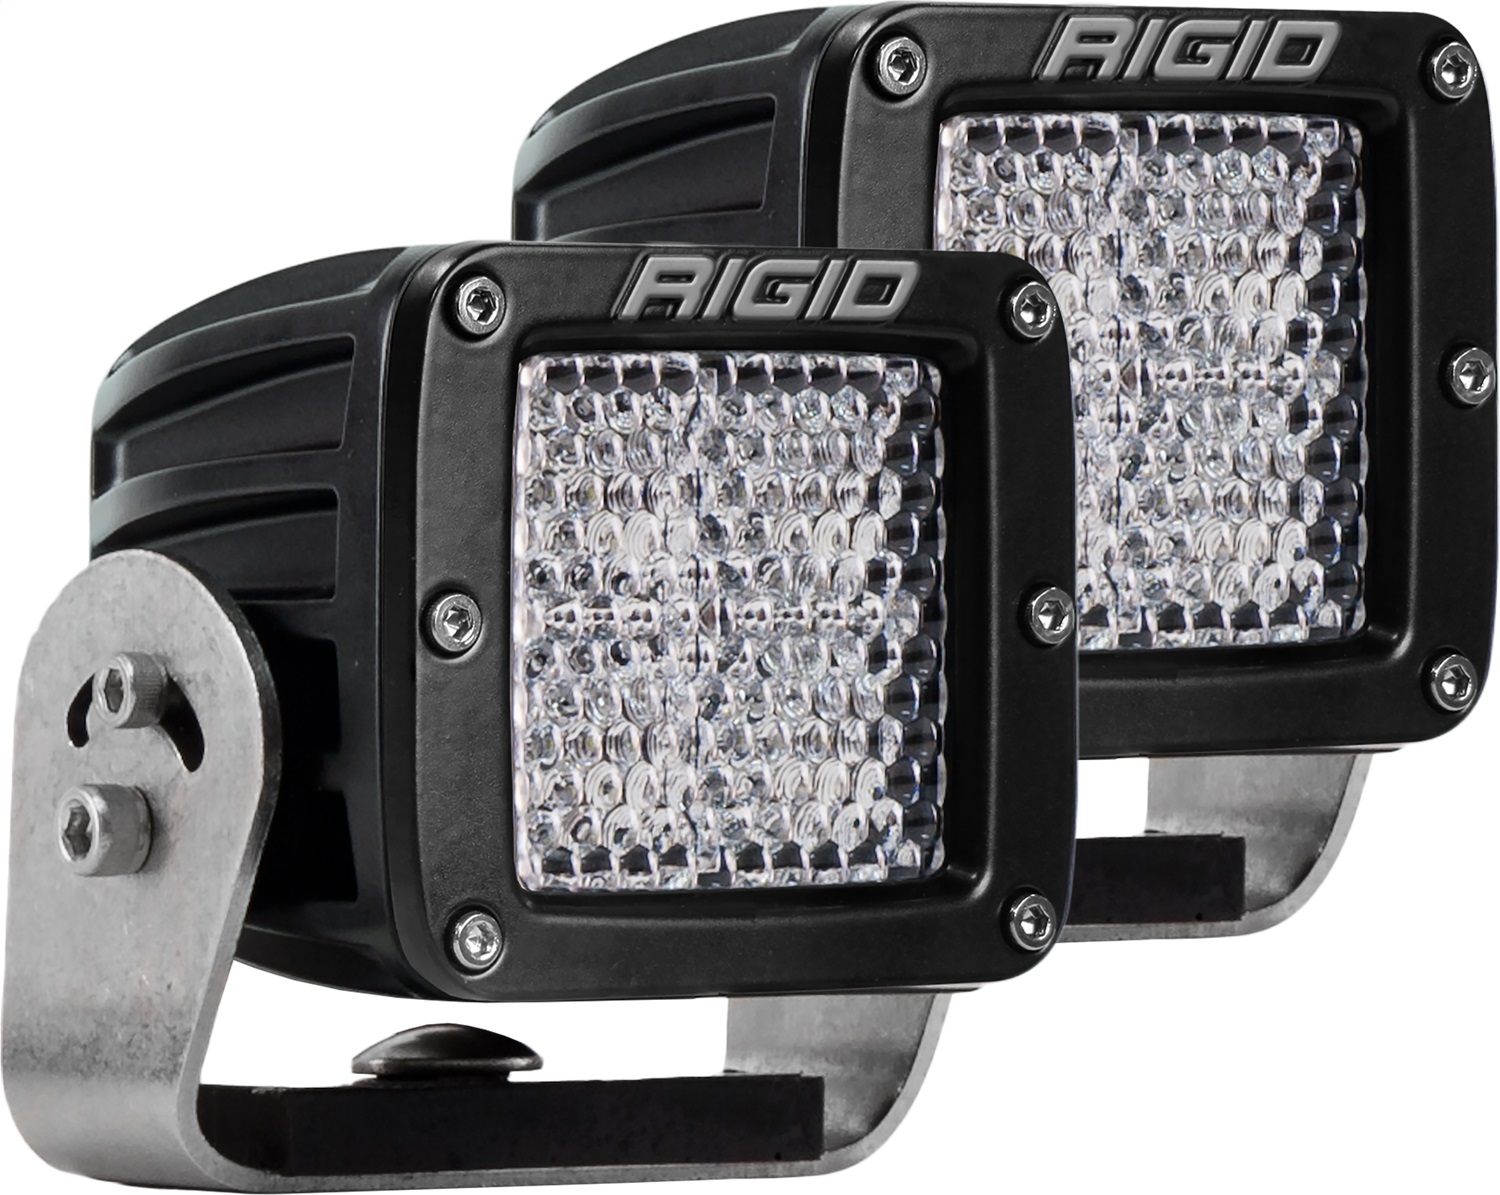 Picture of RIGID Industries 222513 Rigid D-Series Pro Led Light, Diffused Lens, Heavy Duty, Black Housing, Pair